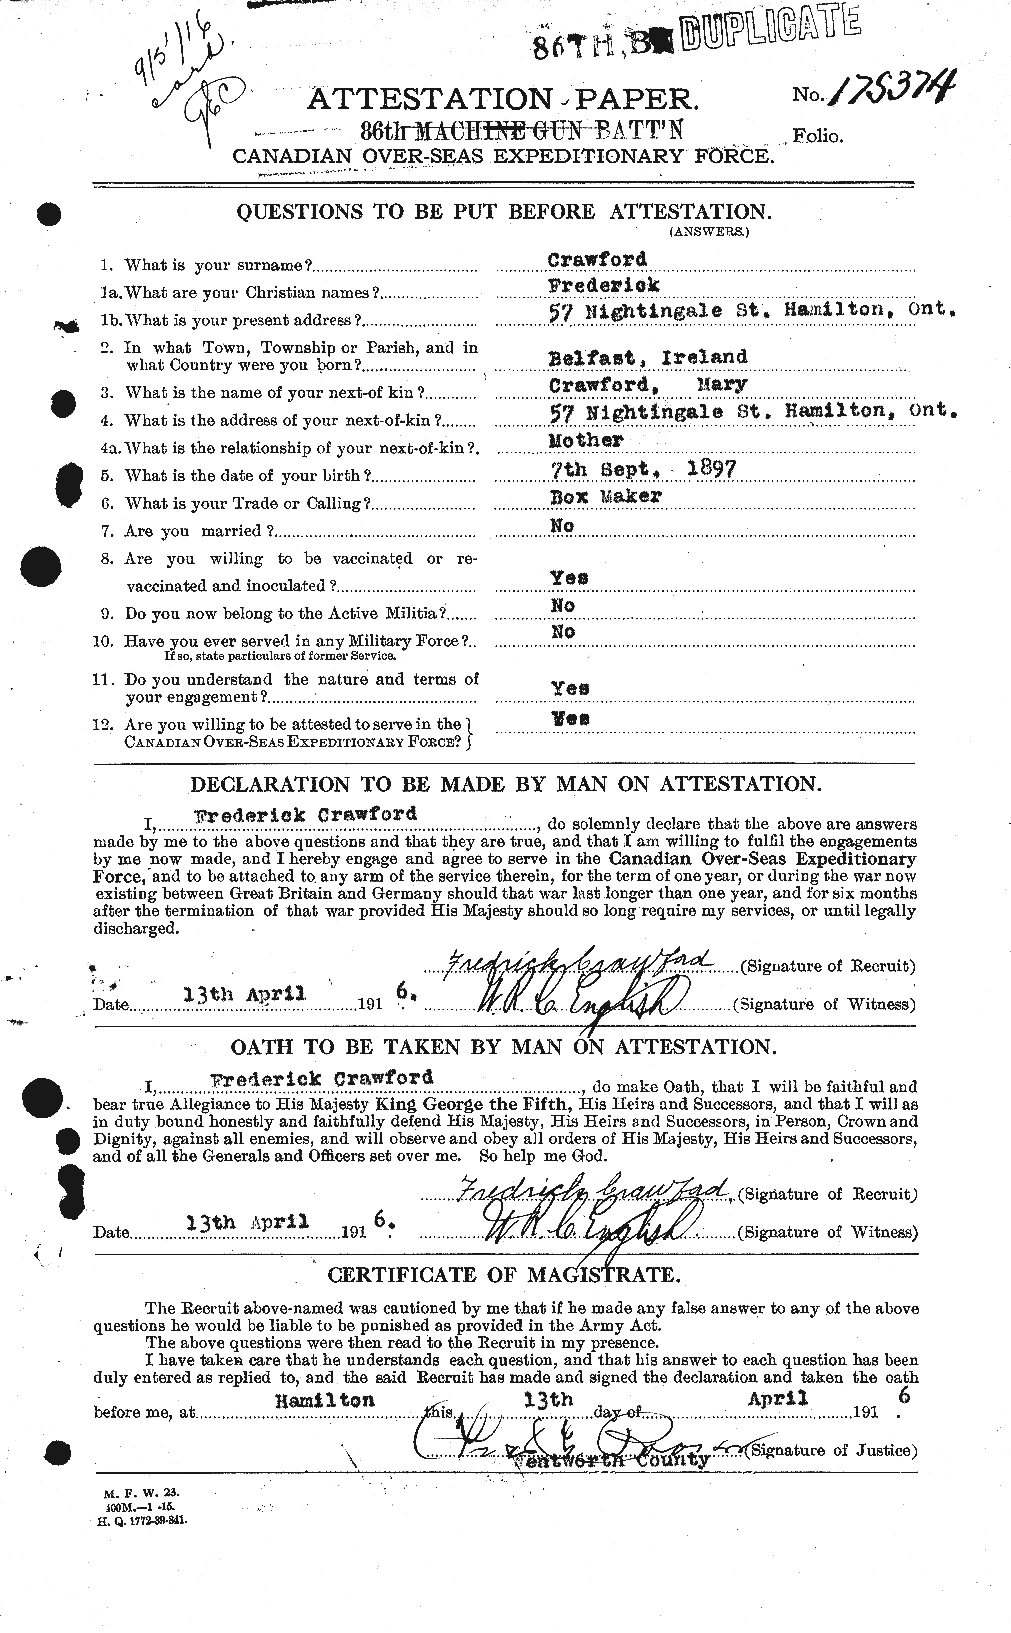 Personnel Records of the First World War - CEF 060728a